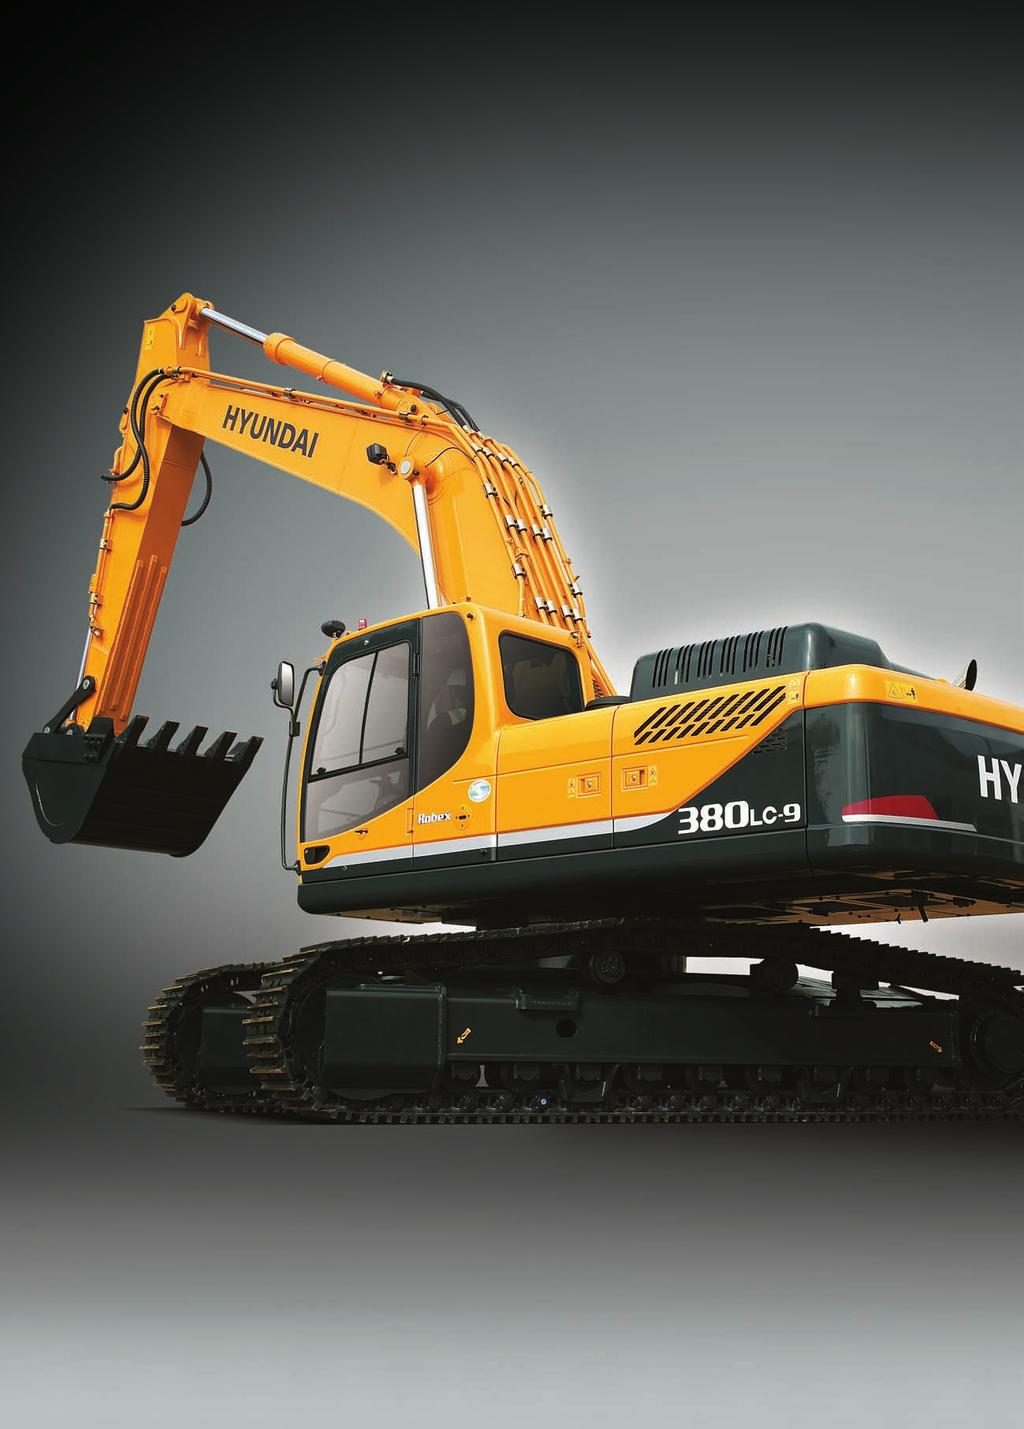 Precision Innovative hydraulic system technologies make the Dash 9 excavator fast, smooth and easy to control.